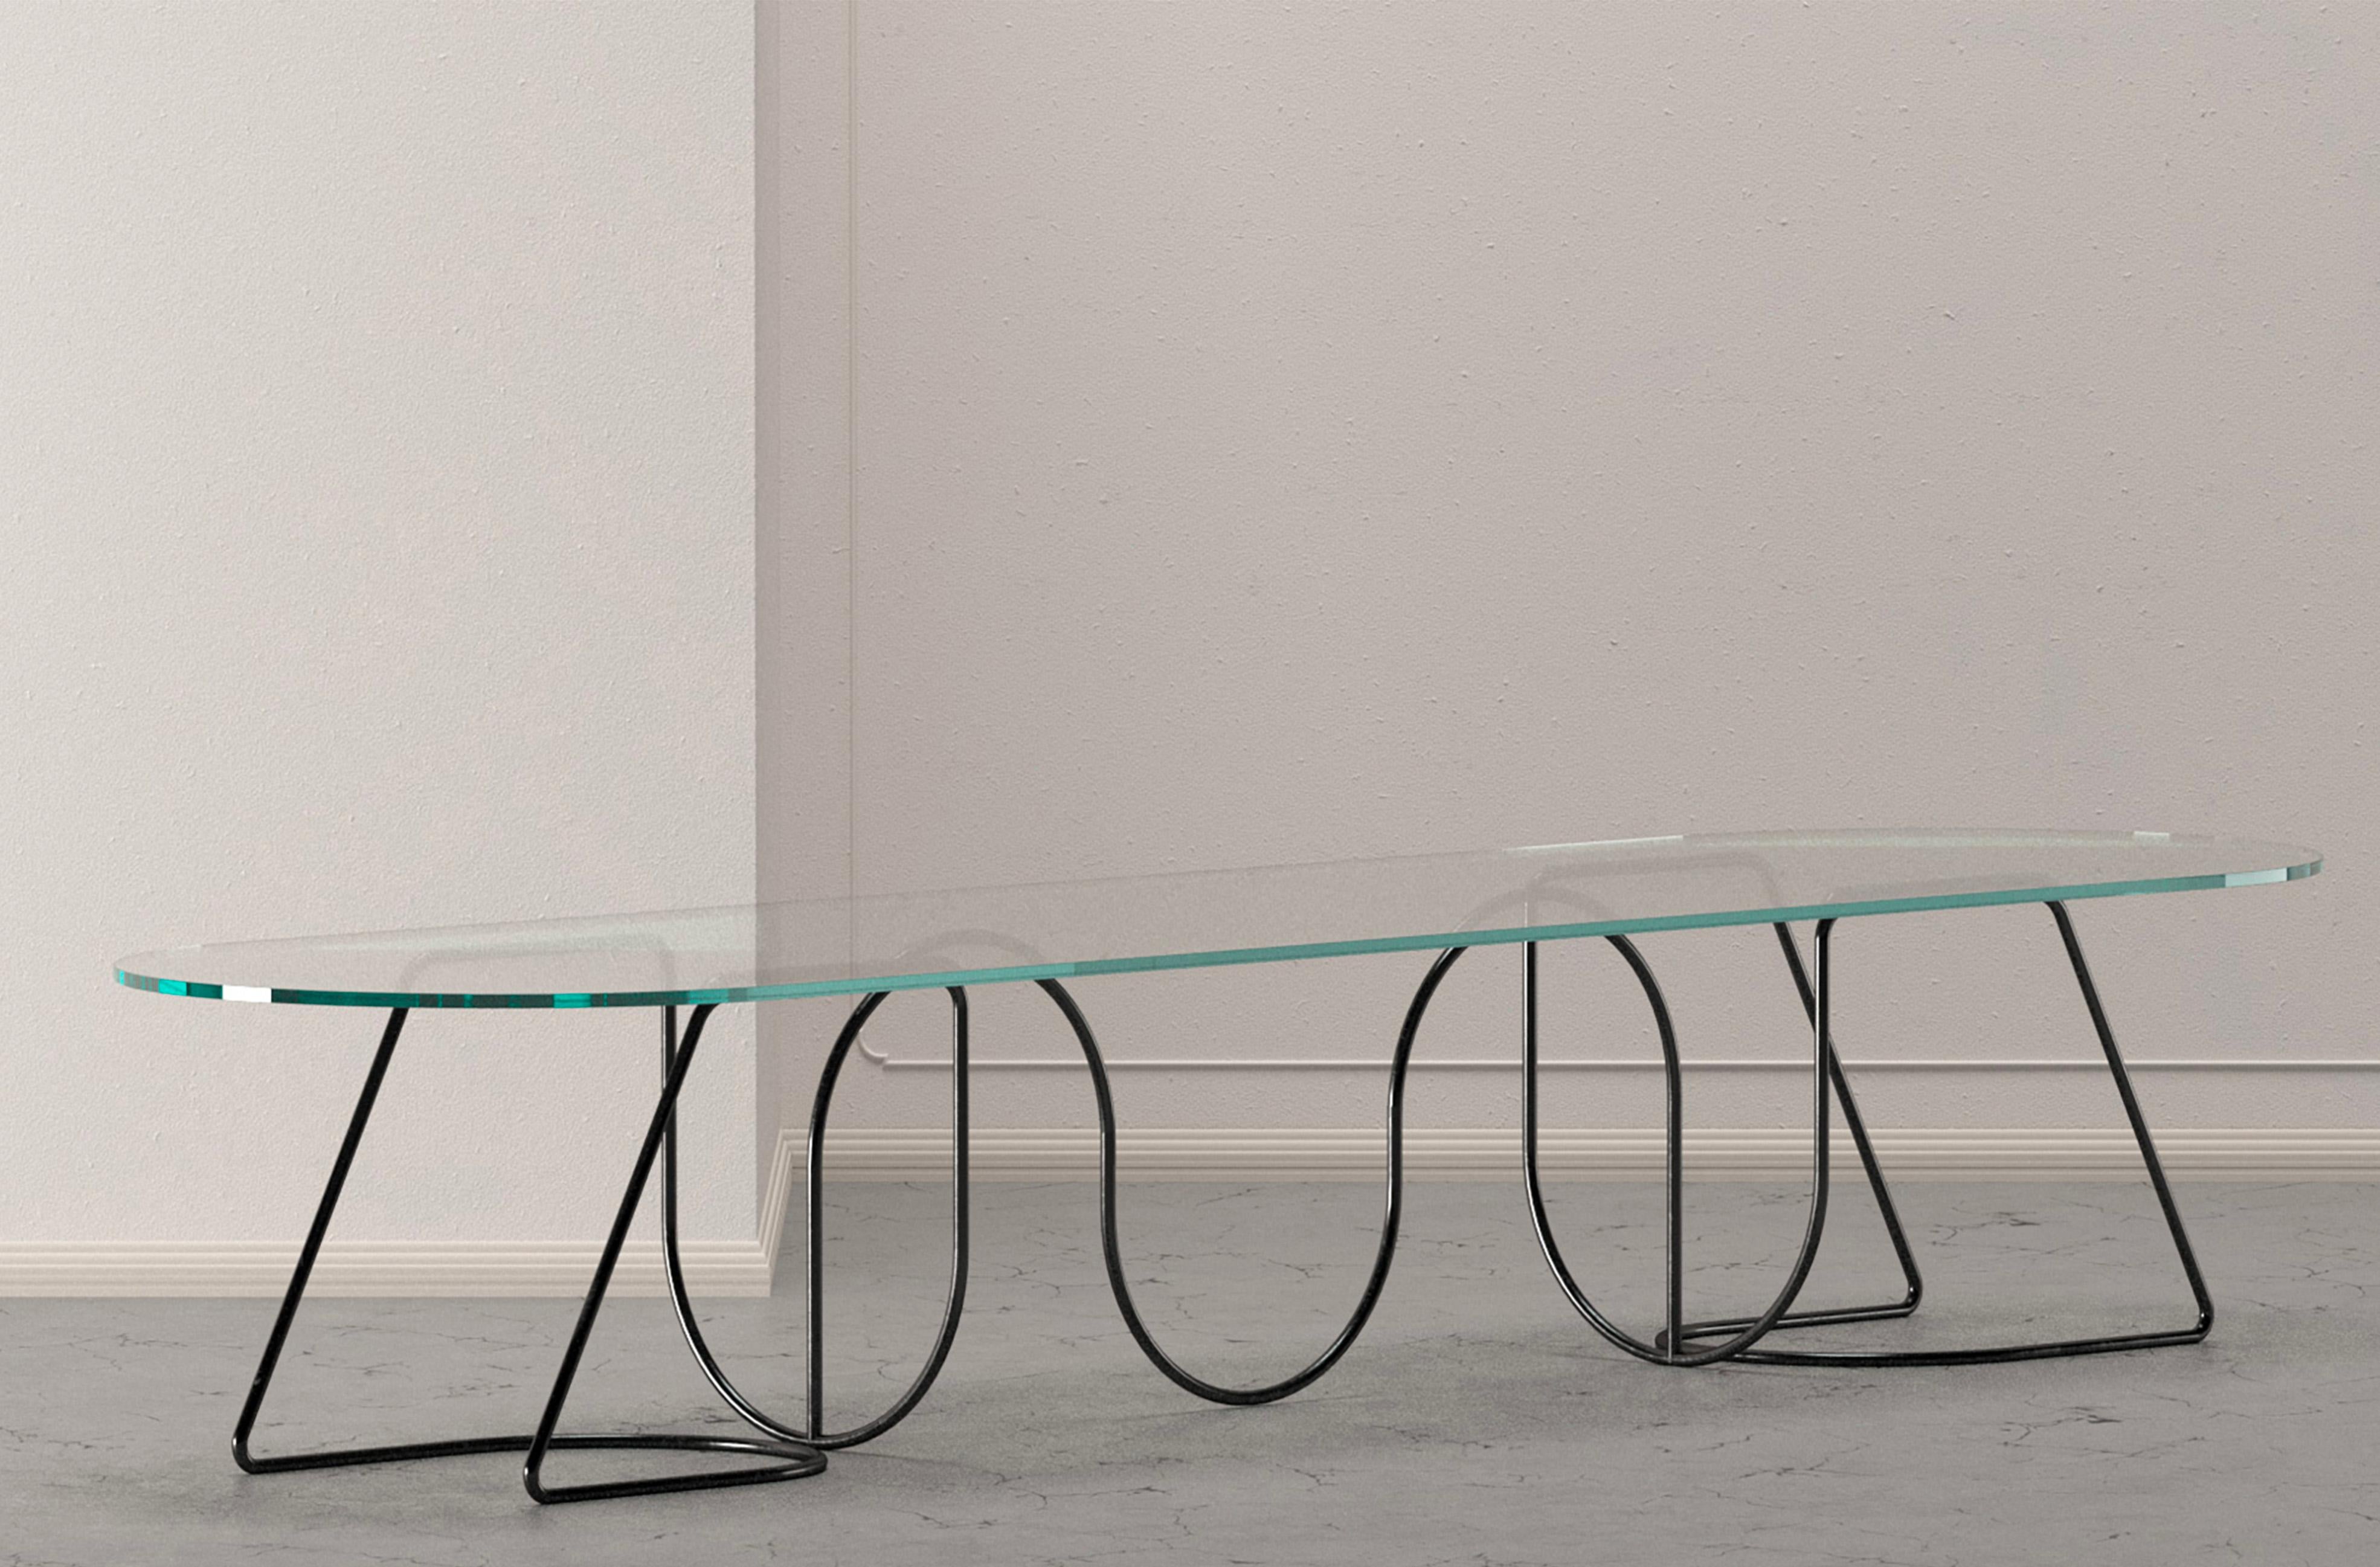 A splendid addition to contemporary-style decors, this refined table stands out for the intricate and sculptural base in cylindrical steel. A wide transparent glass top with rounded sides sits atop the base, allowing the dynamic design underneath to